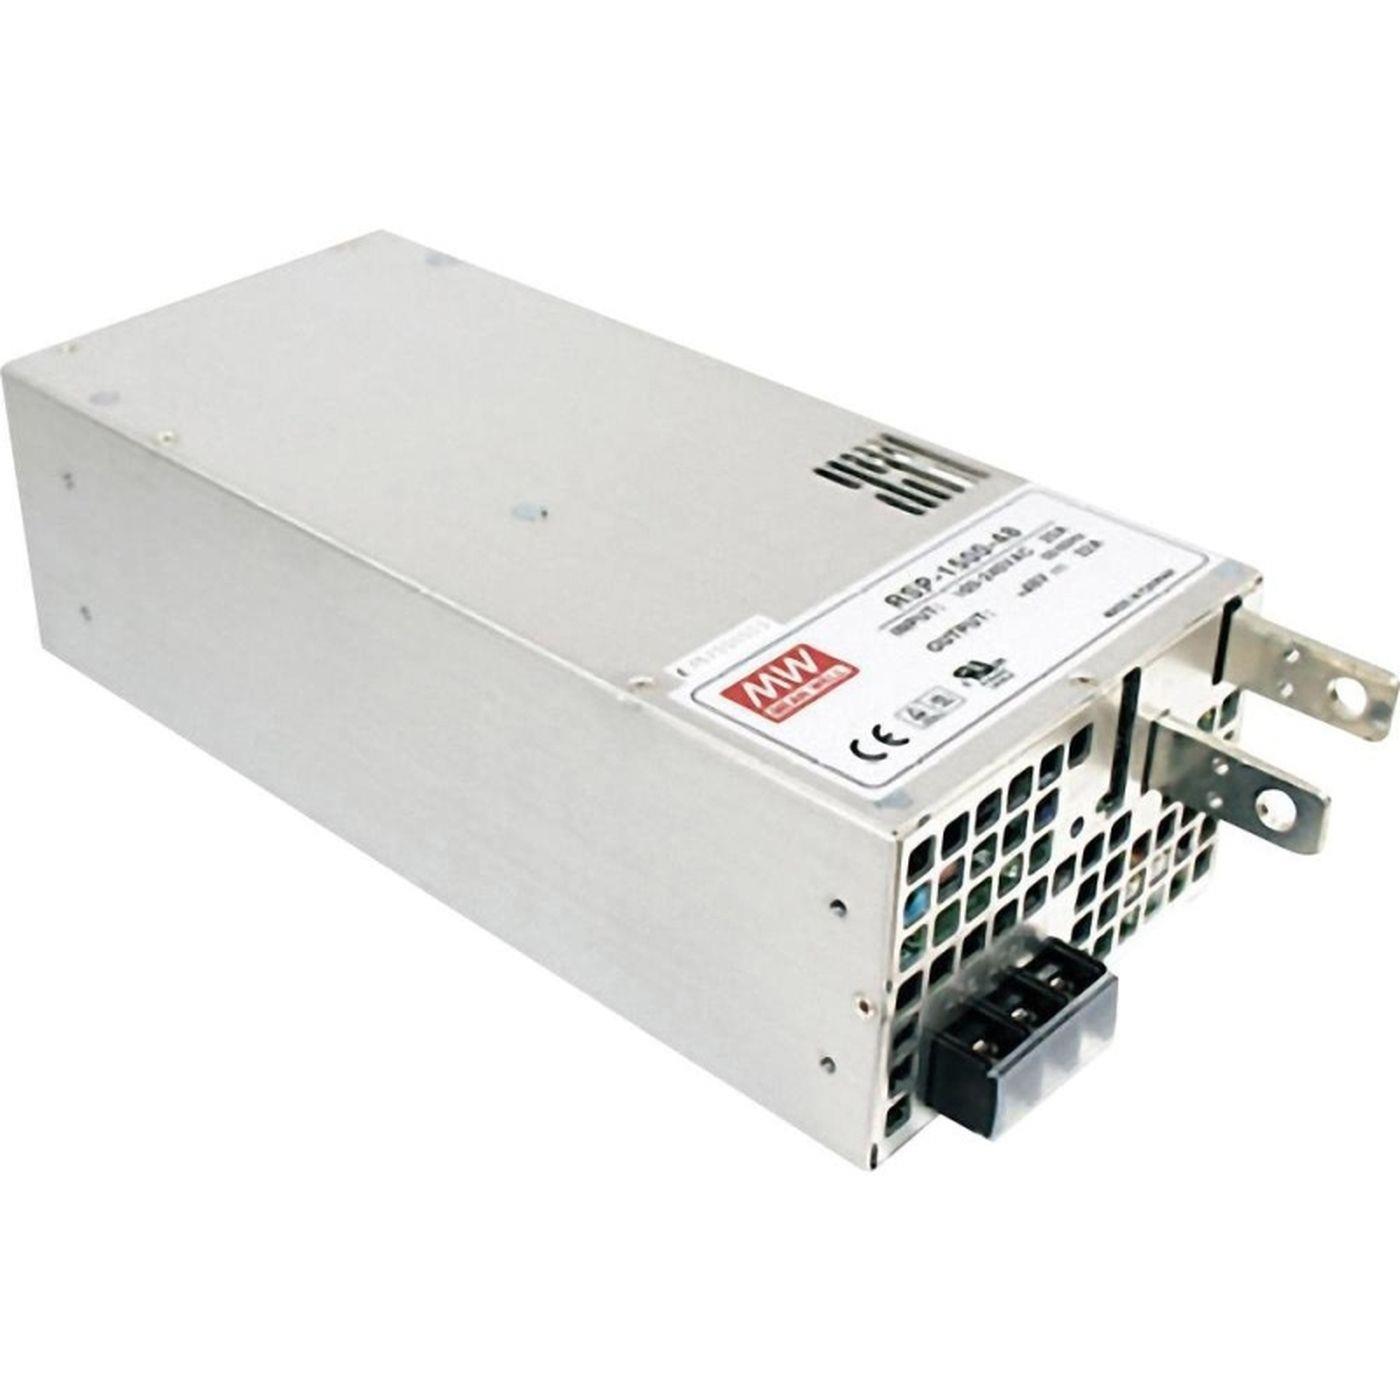 RSP-1500-48 1500W 48V 32A Industrial power supply